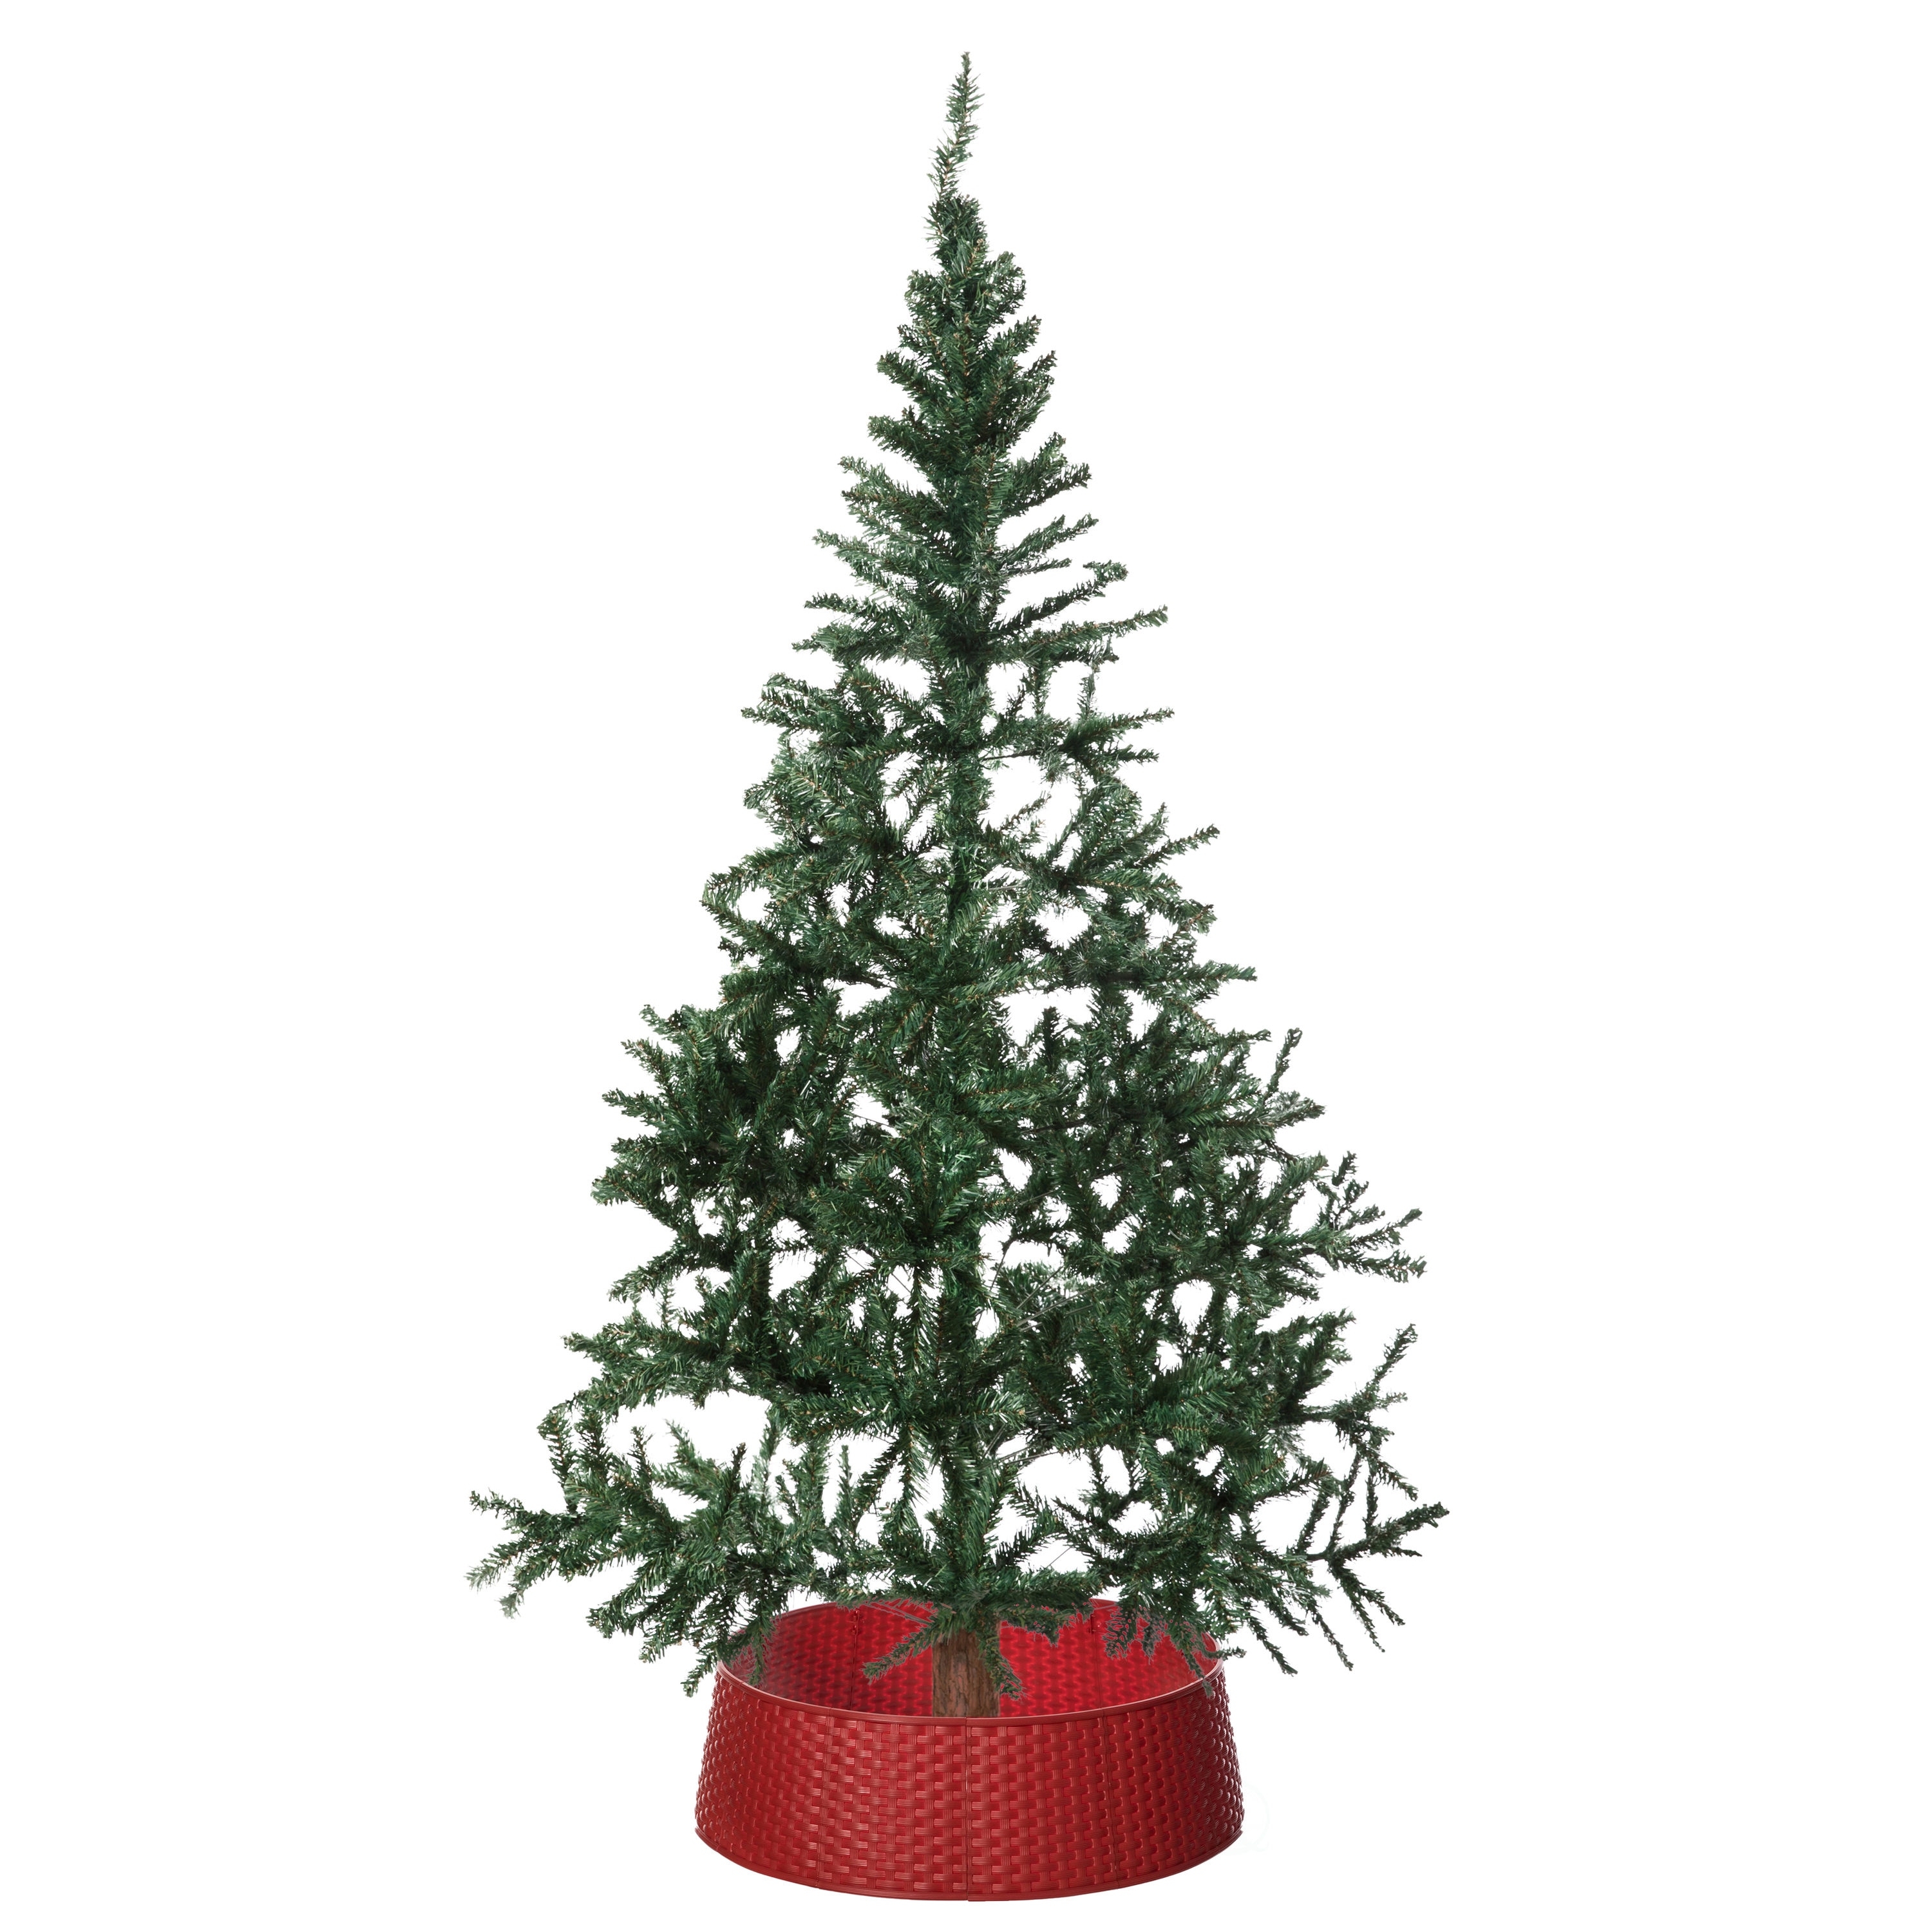 Plastic Christmas Tree Stands at Lowes.com